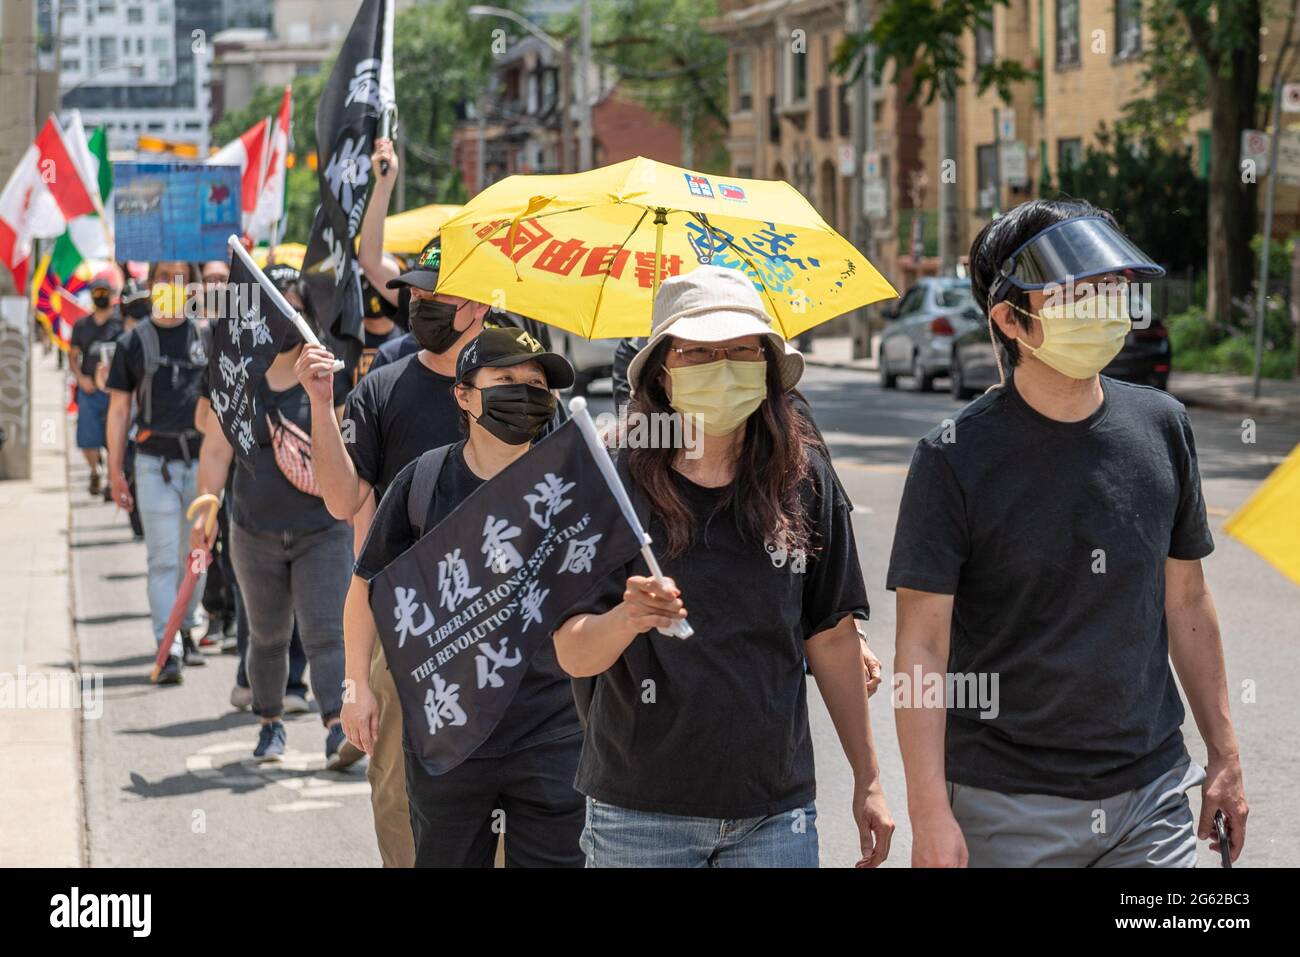 The Chinese community in Toronto is protesting against China's Communist Party and Government. The event takes place during Canada Day celebrations. They Stock Photo